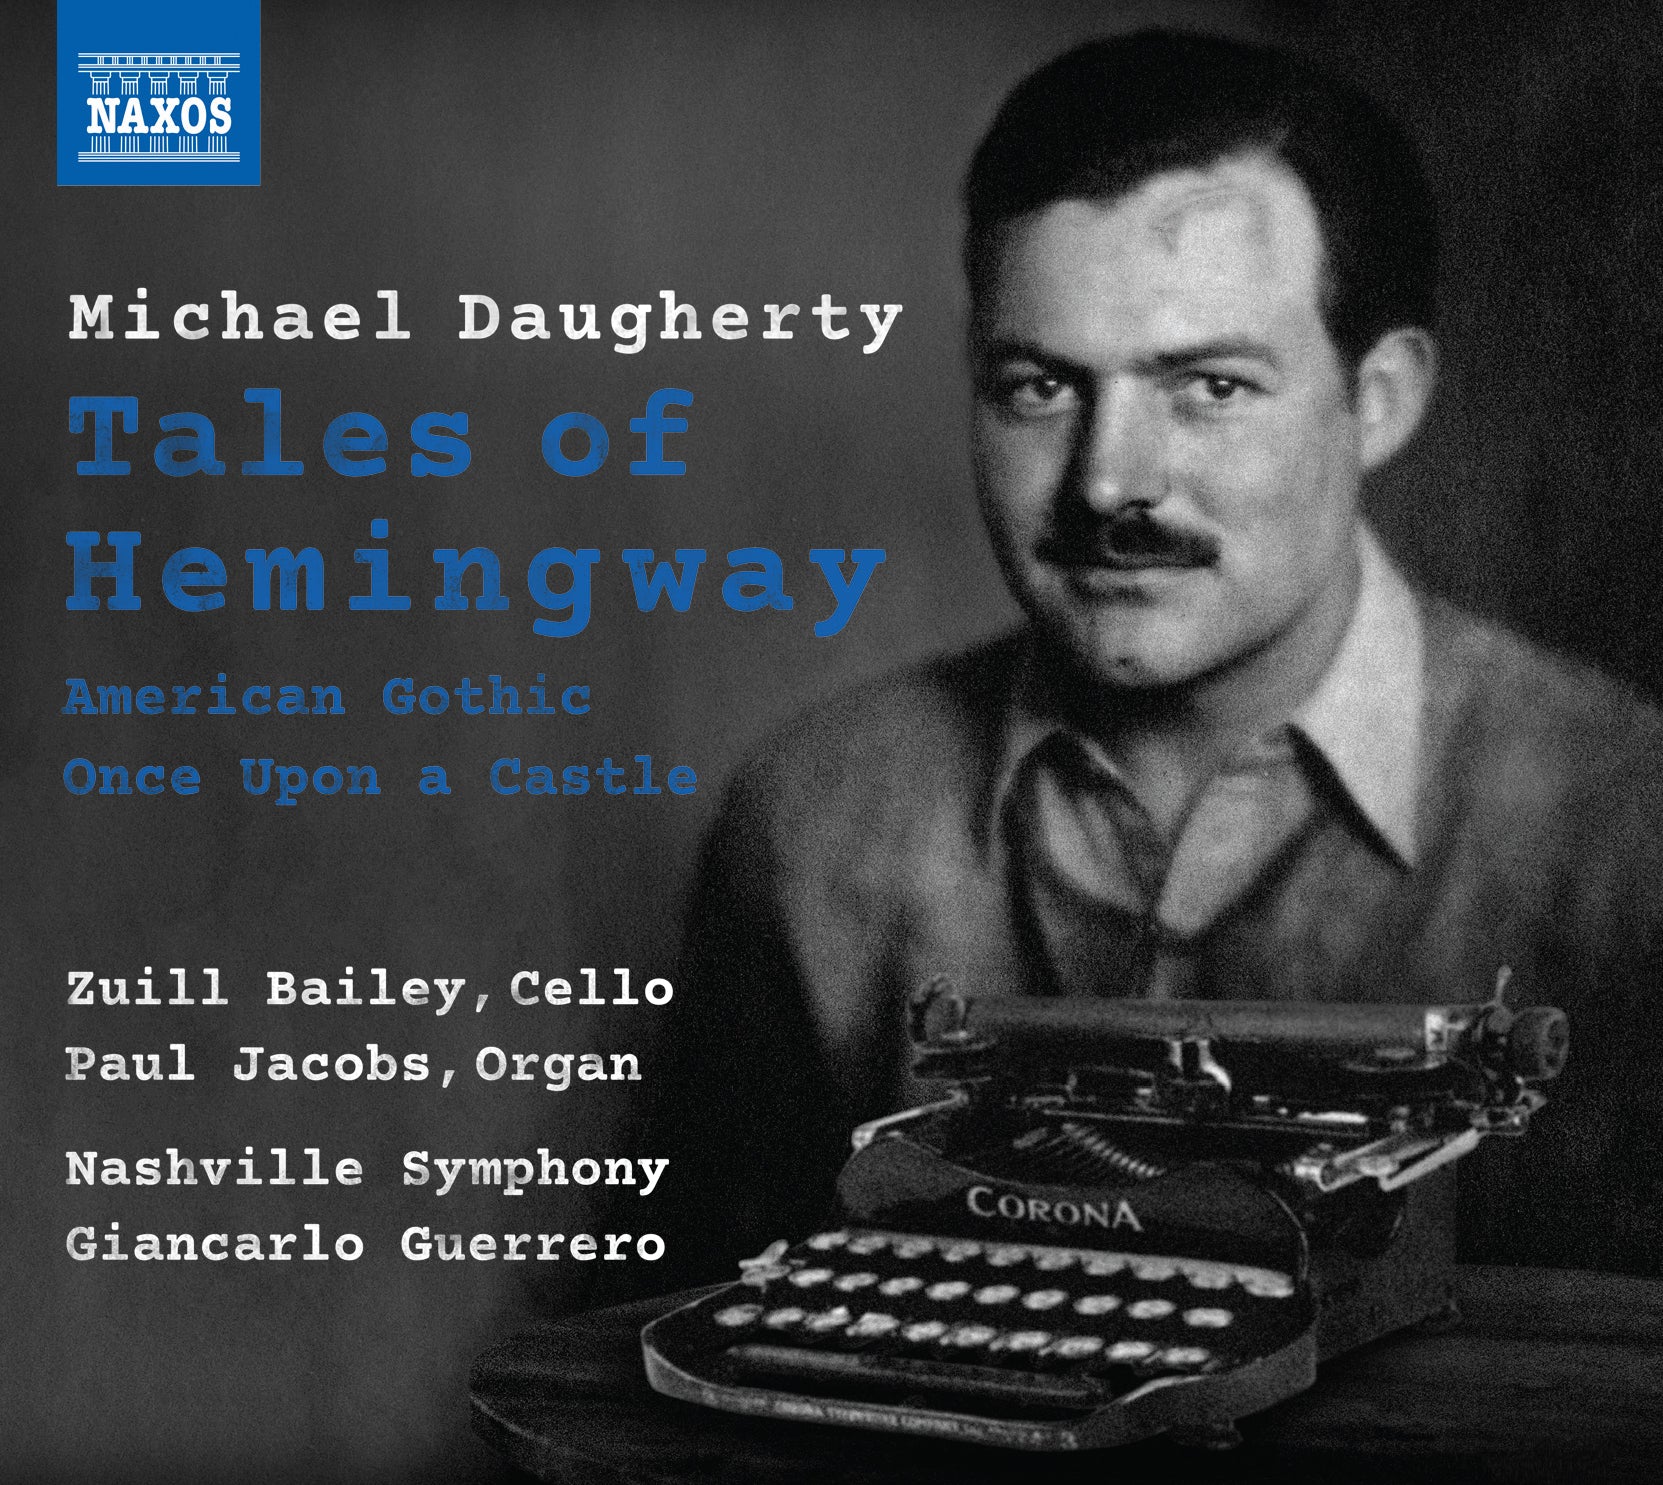 Michael Daugherty: Tales of Hemingway, American Gothic & Once upon a Castle / Giancarlo, Guerrero, Jacobs, Nashville Symphony Orchestra